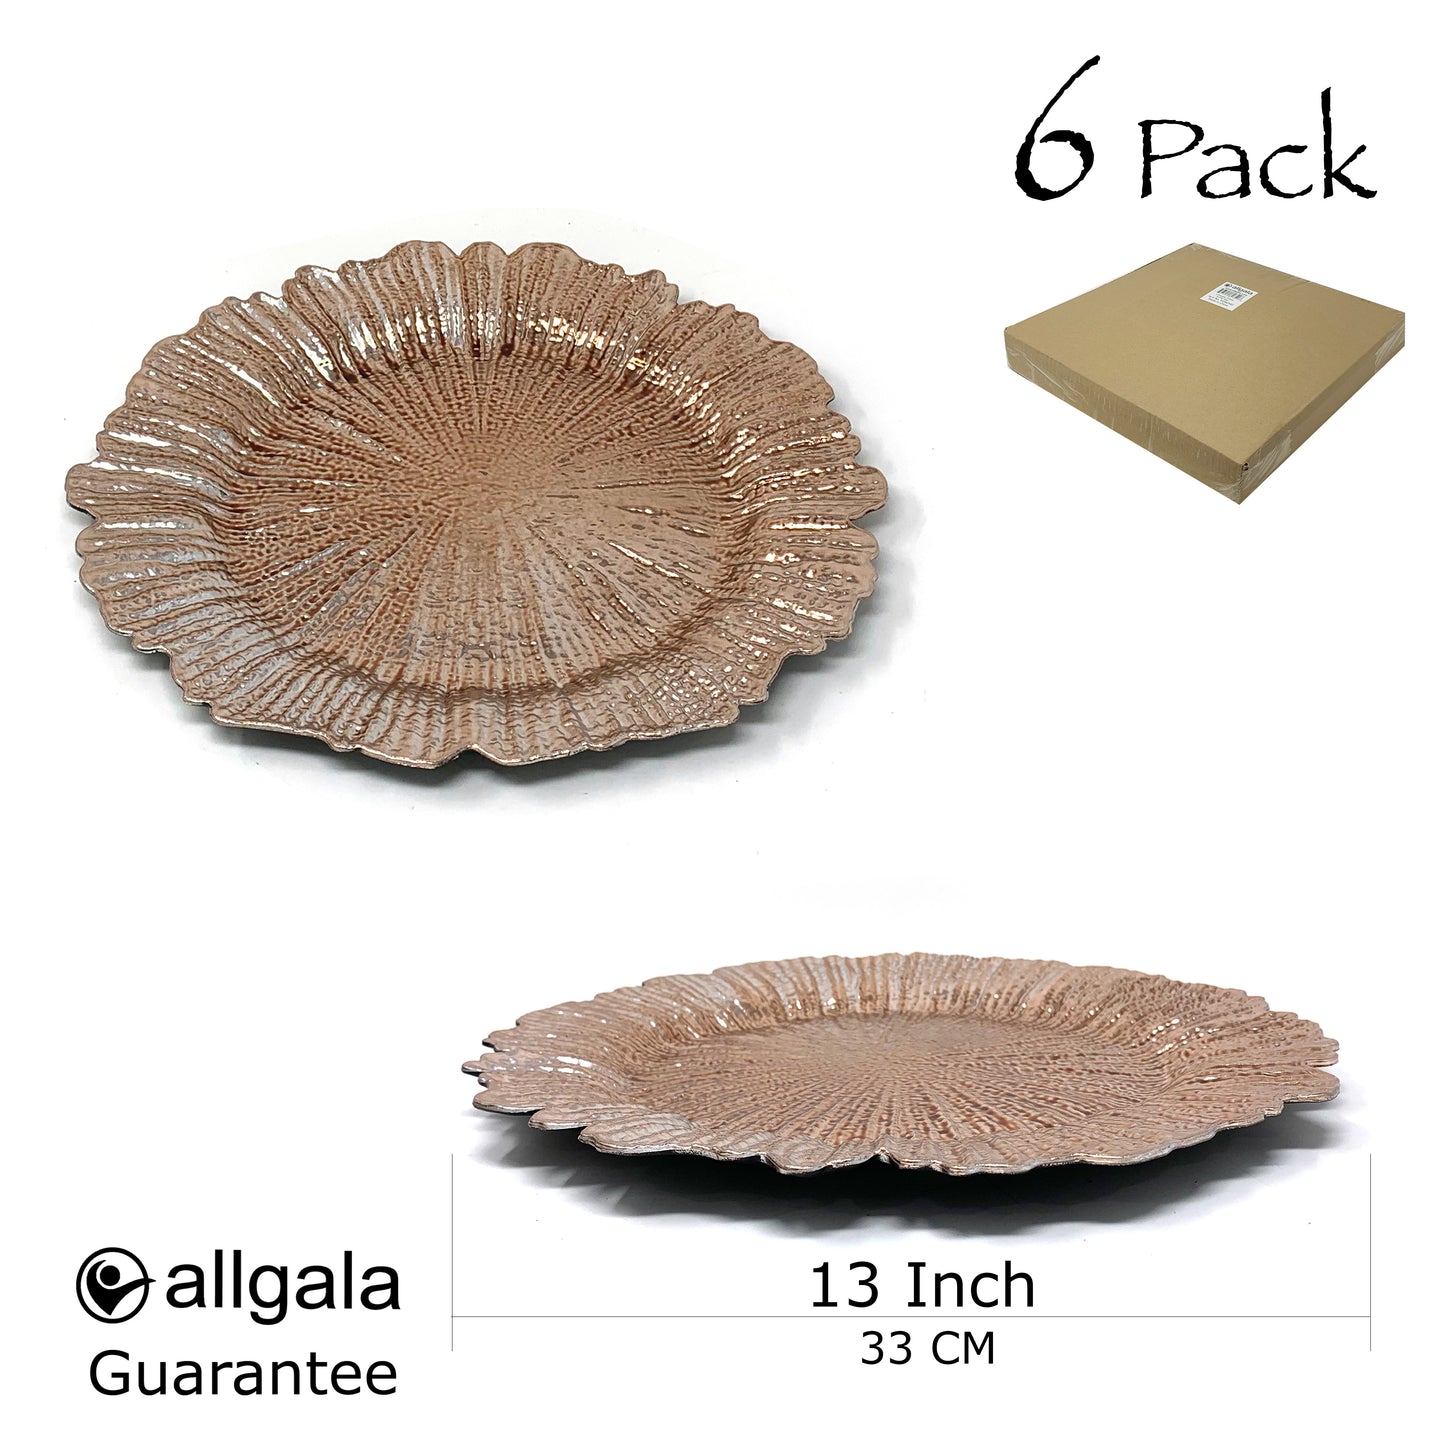 Allgala Charger Plates 13-Inch 6-Pack Heavy Quality Round Charger Plates-Reef